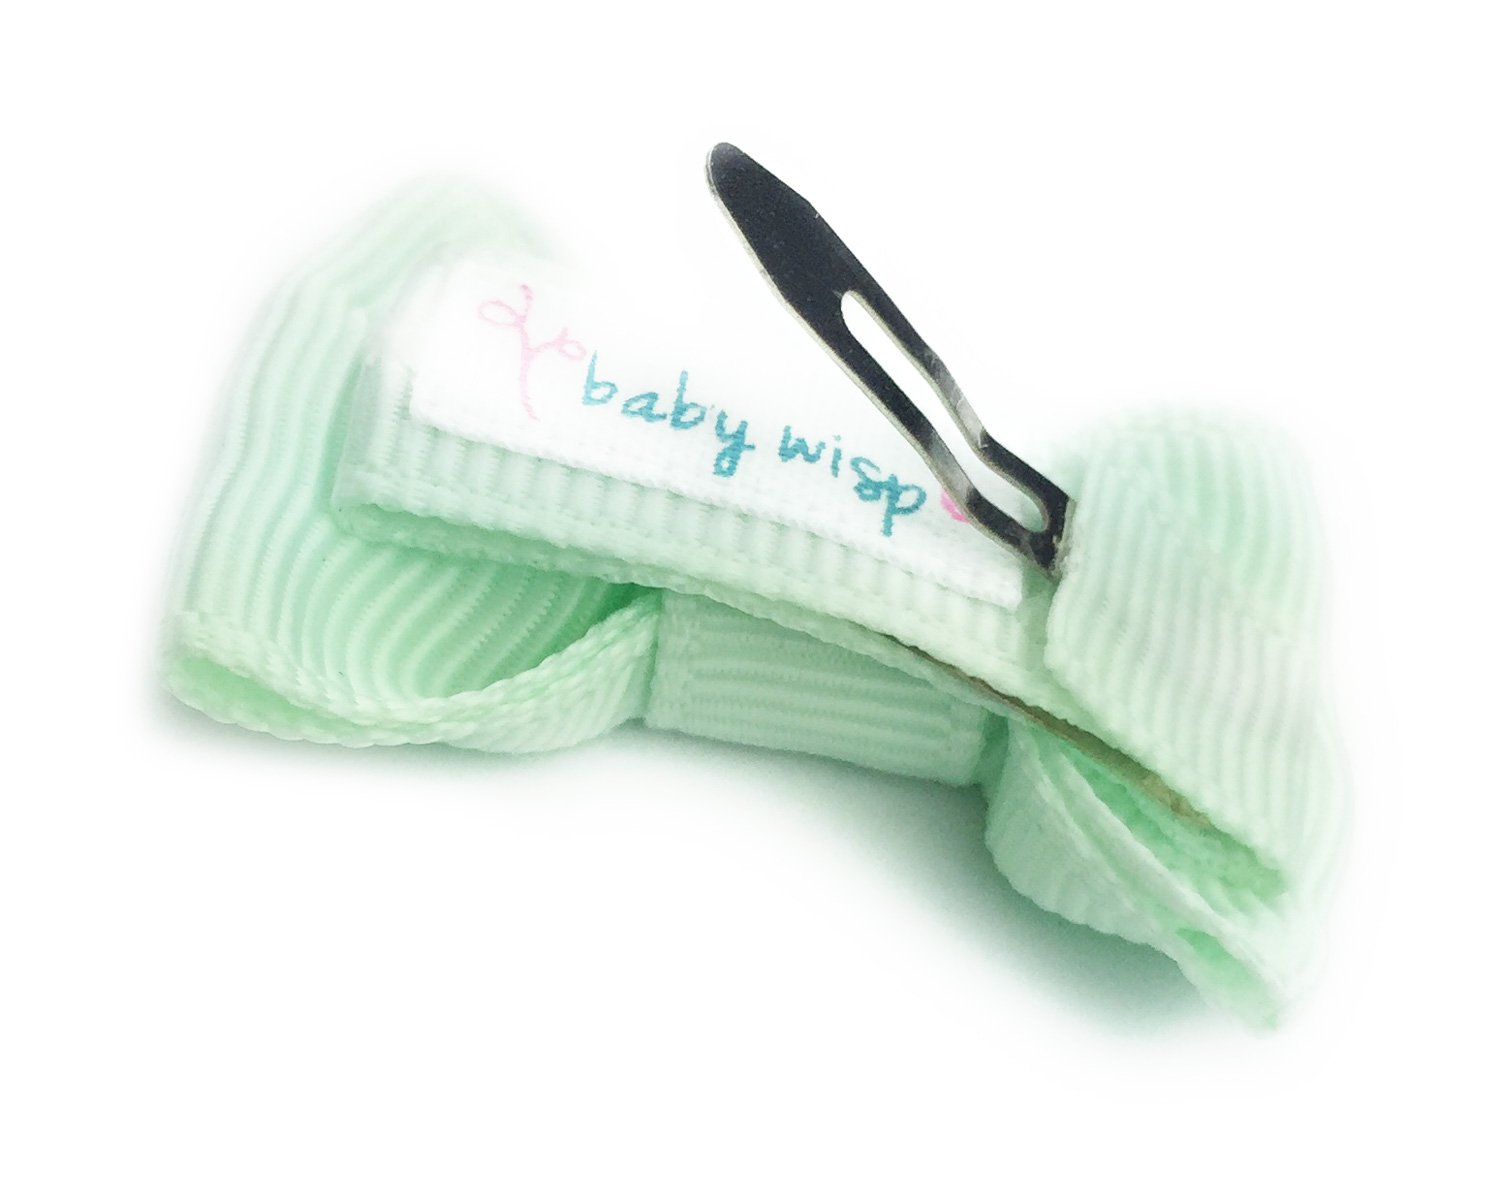 Small Snap Charlotte Bow - Single Hair Bow - Ice Mint Baby Wisp